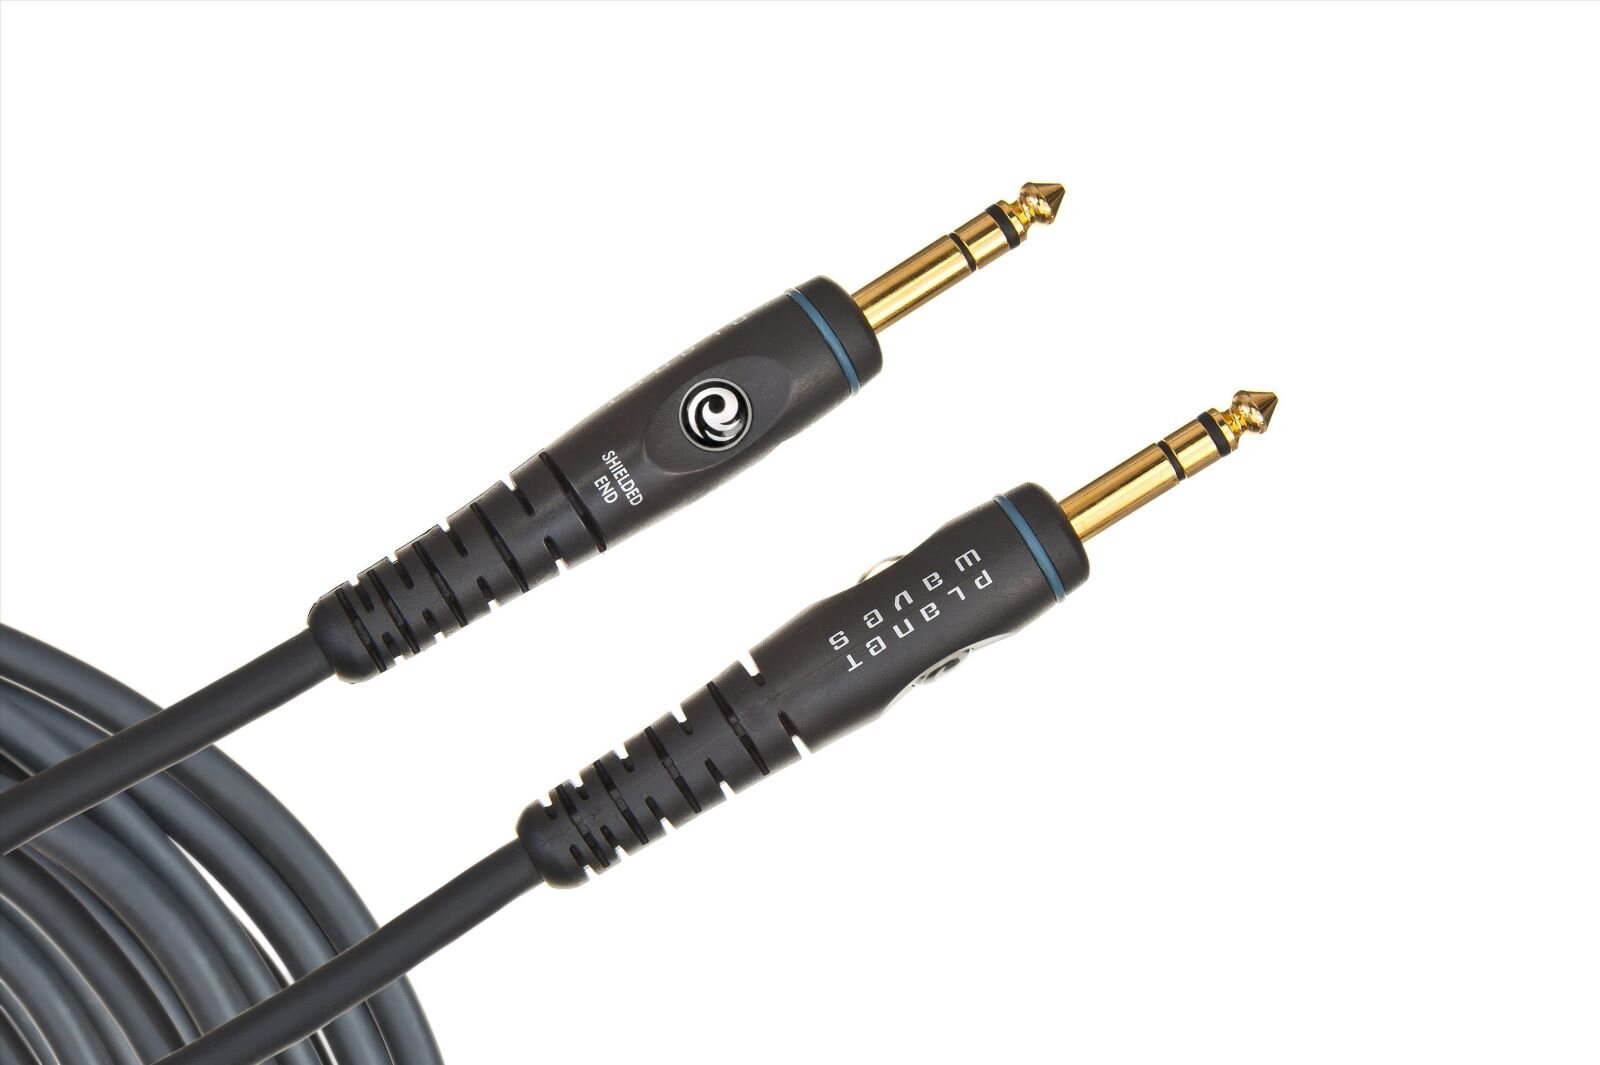 Planet Waves Custom Gold 6.3mm Male Stereo Jack / 6.3mm Male Stereo Jack 7.5m (PW-GS-25) : photo 1